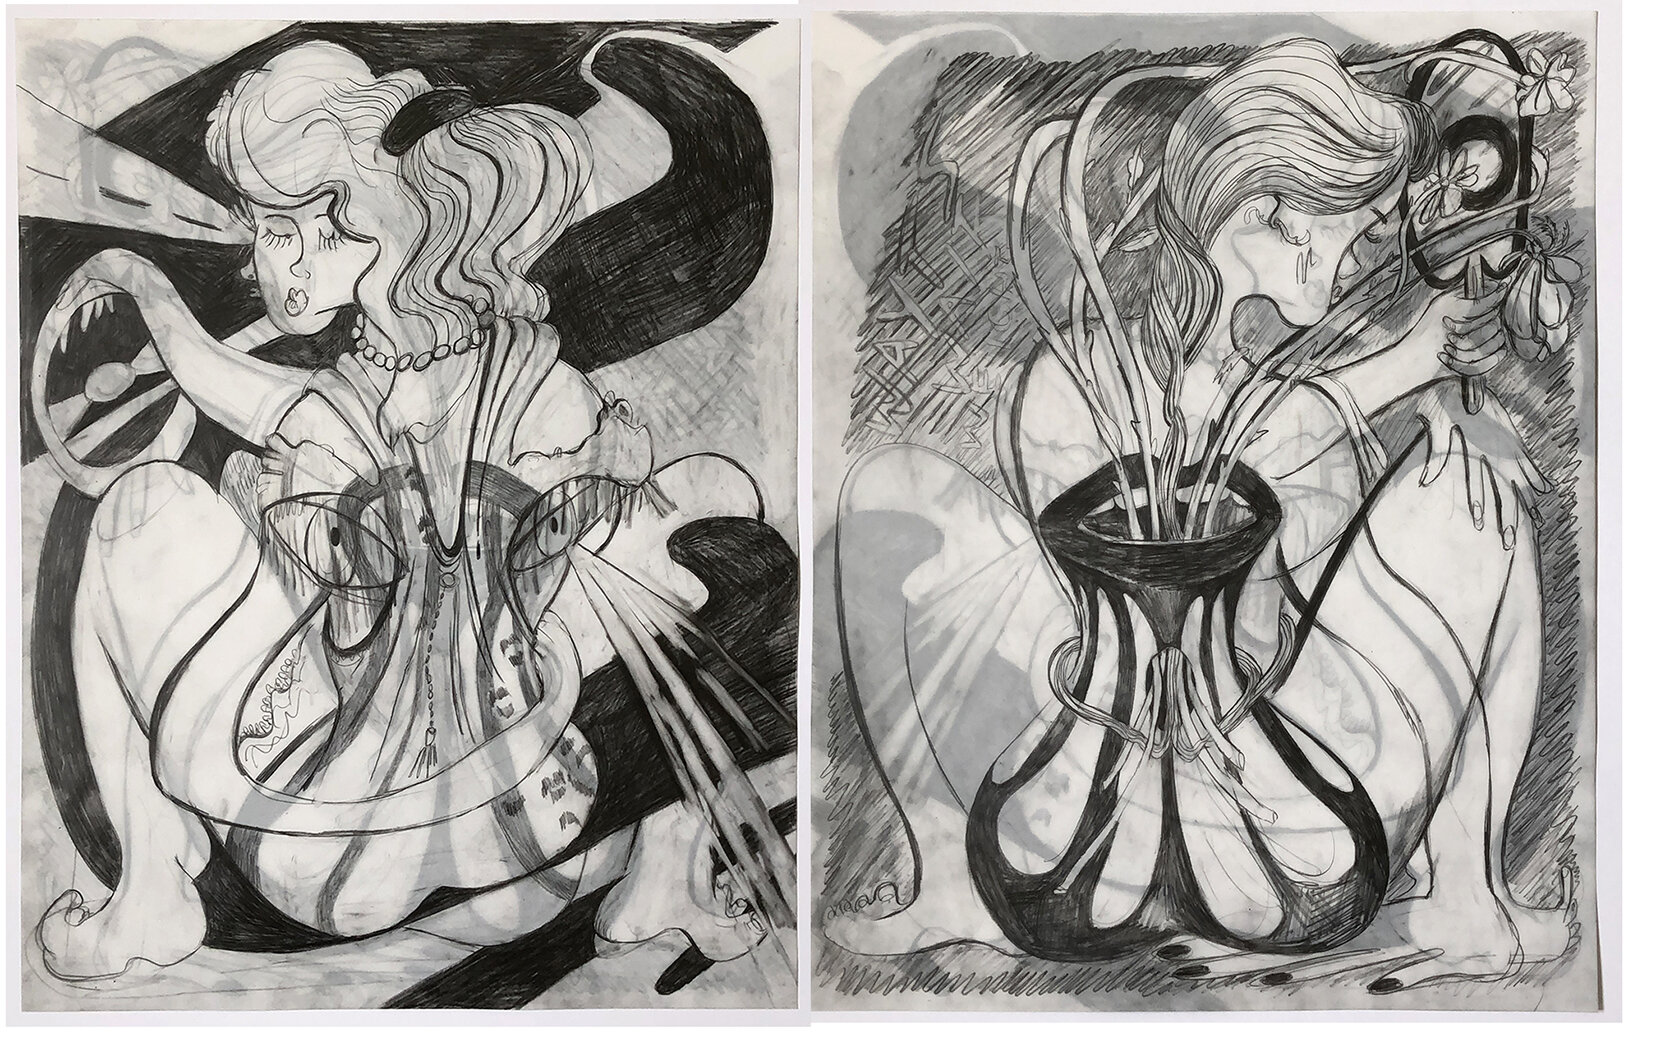   Nightvision,  2020, graphite on translucent Yupo paper (front-and-back drawings), 11 x 14” 